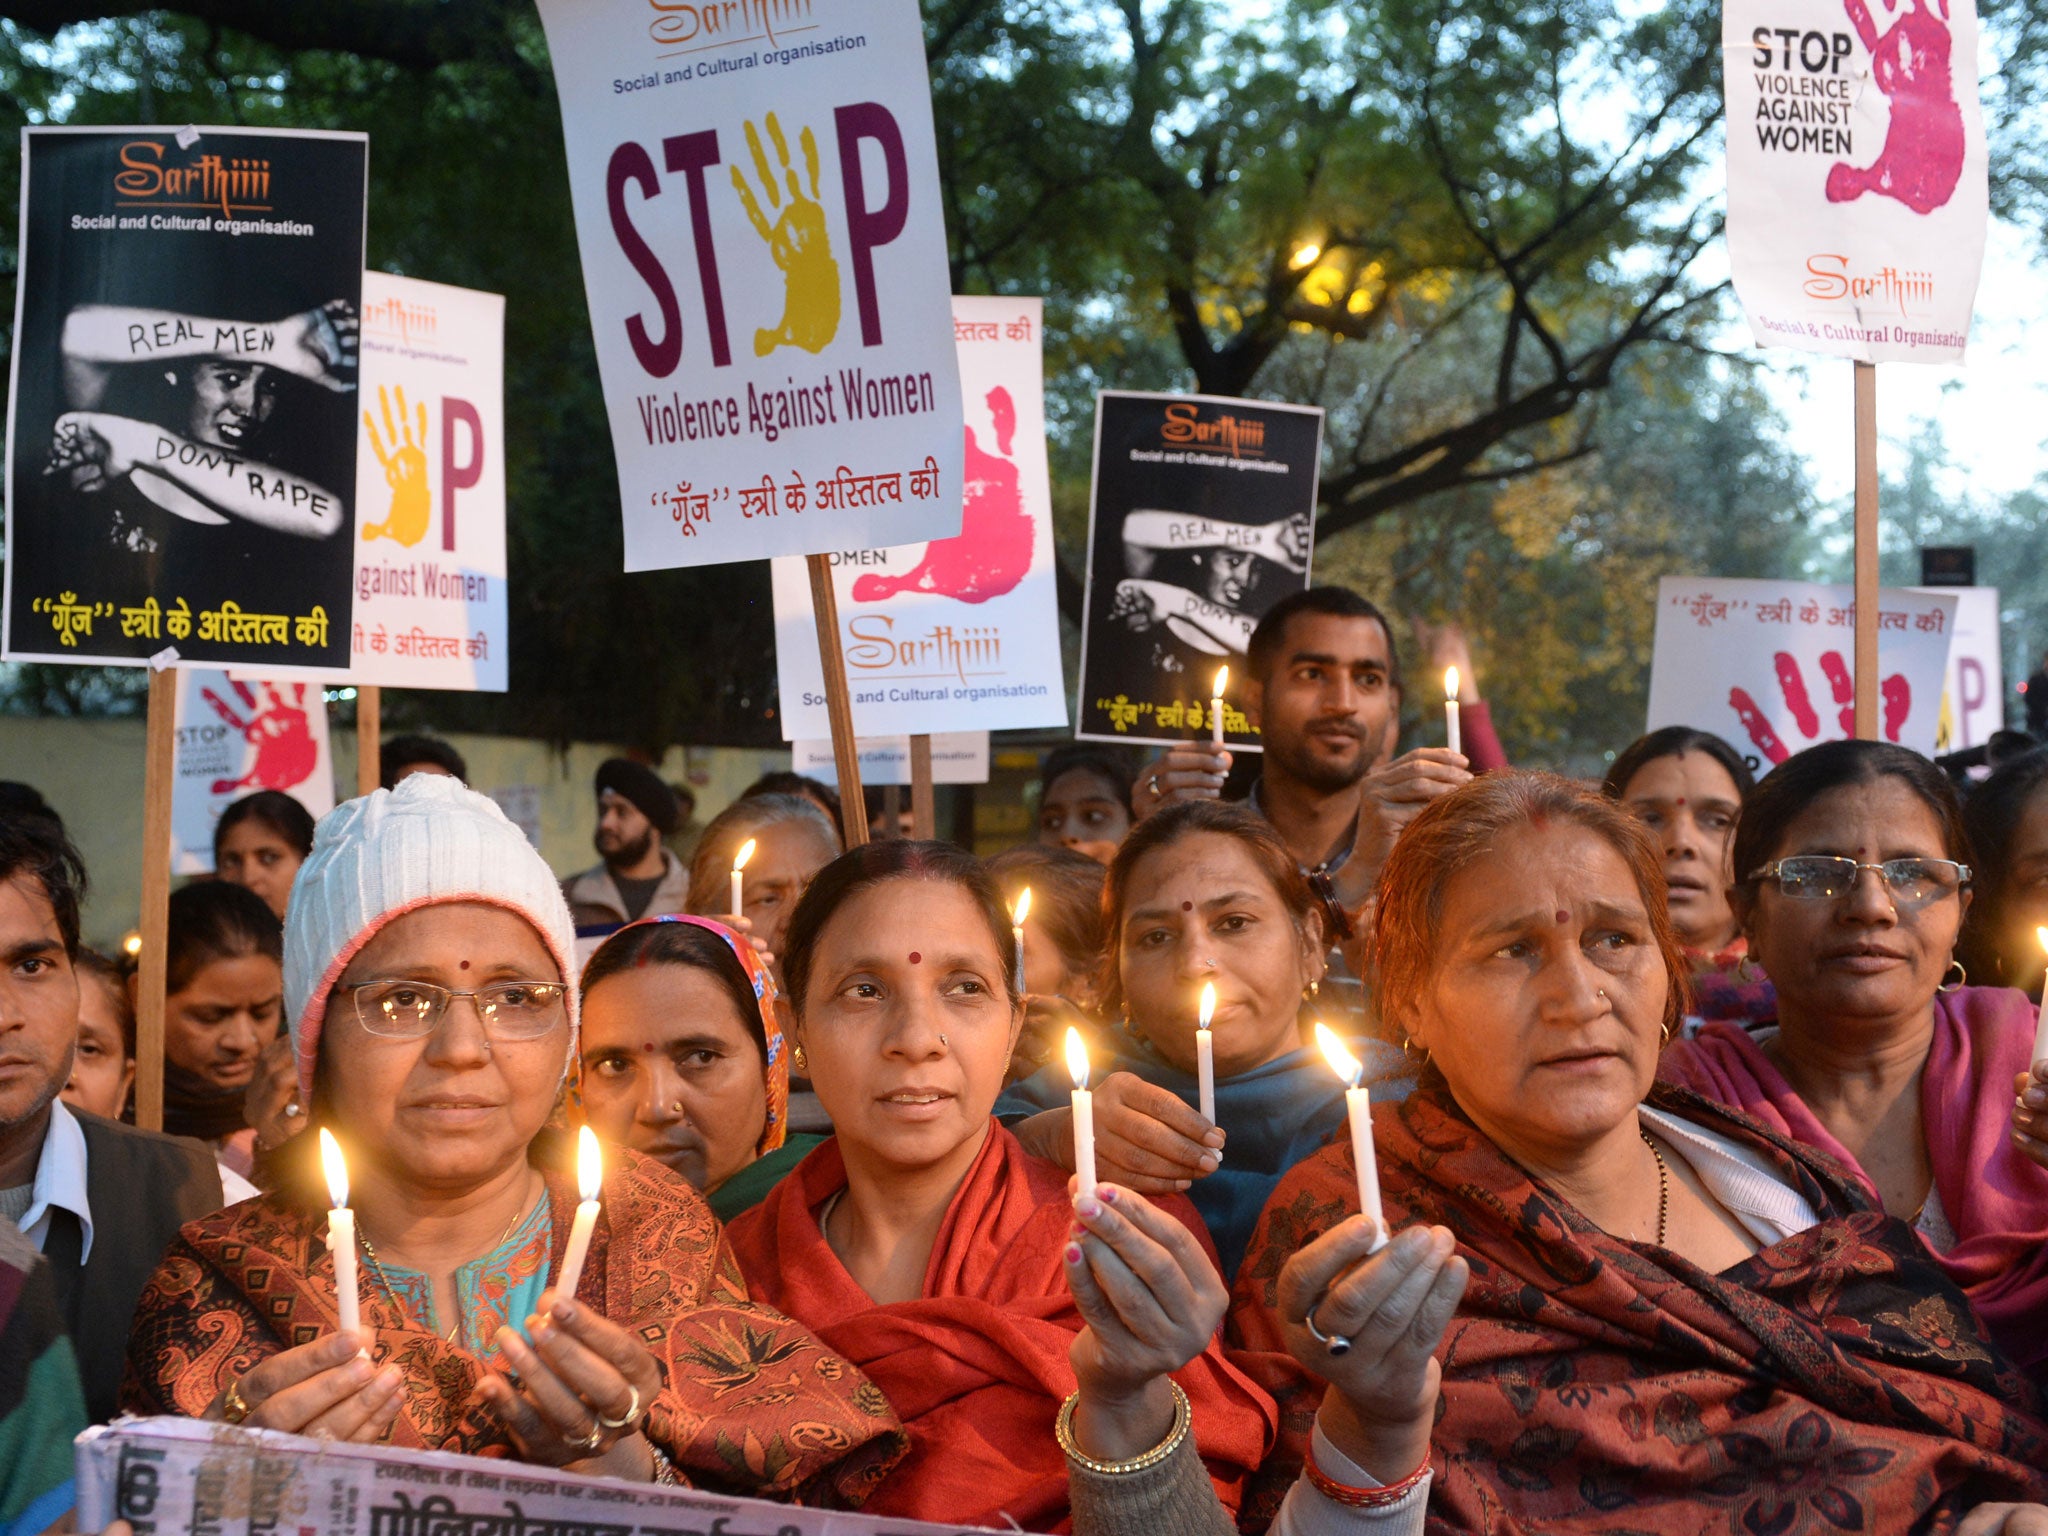 A vigil marking the year anniversary of the death of the physiotherapy student gang-raped in Delhi in December 2012